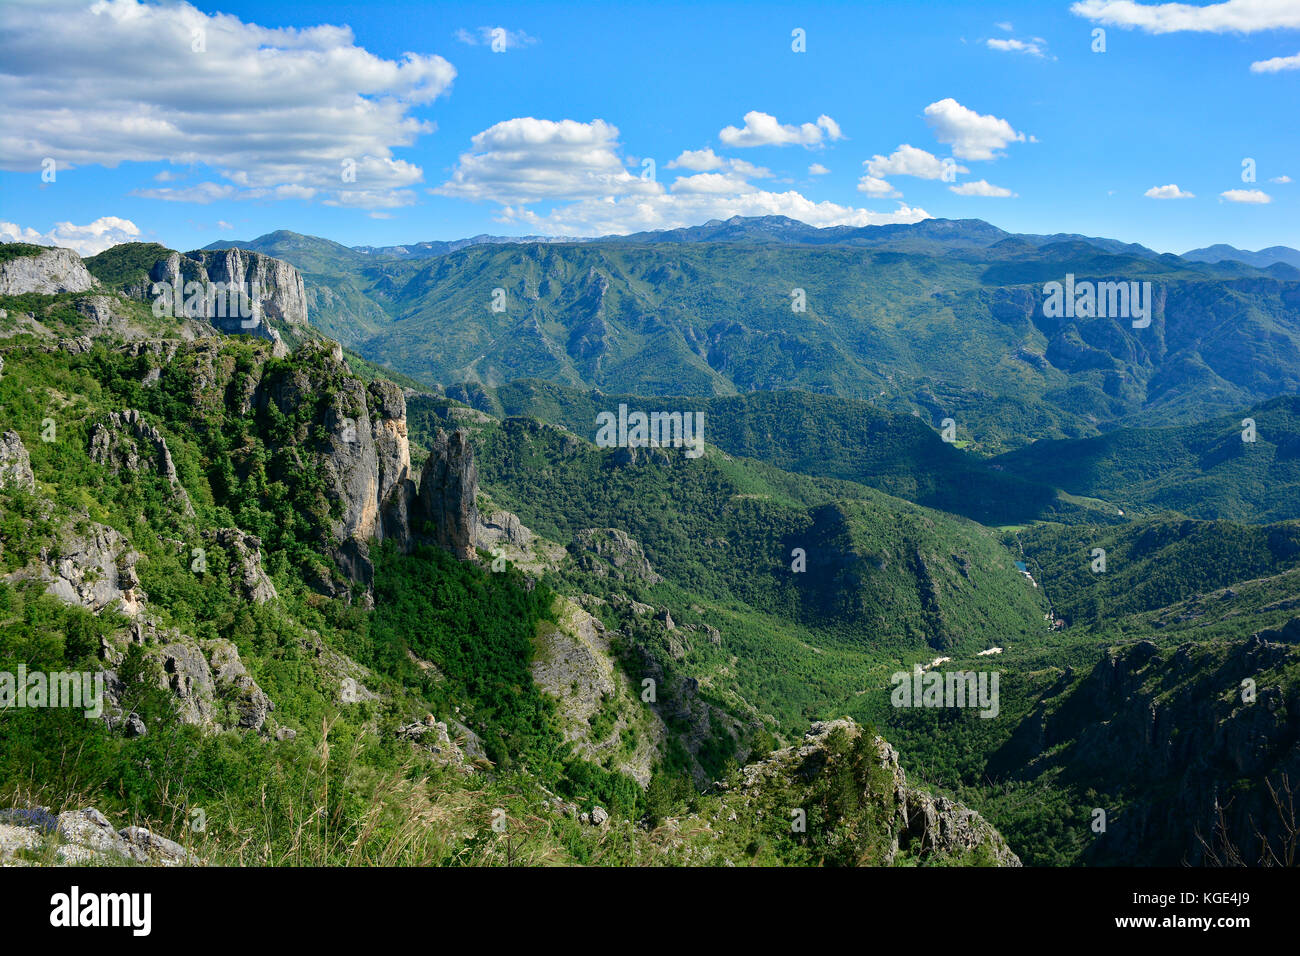 The landscape close to the village of Dolovi near the border between Bosnia and Montenegro. Stock Photo